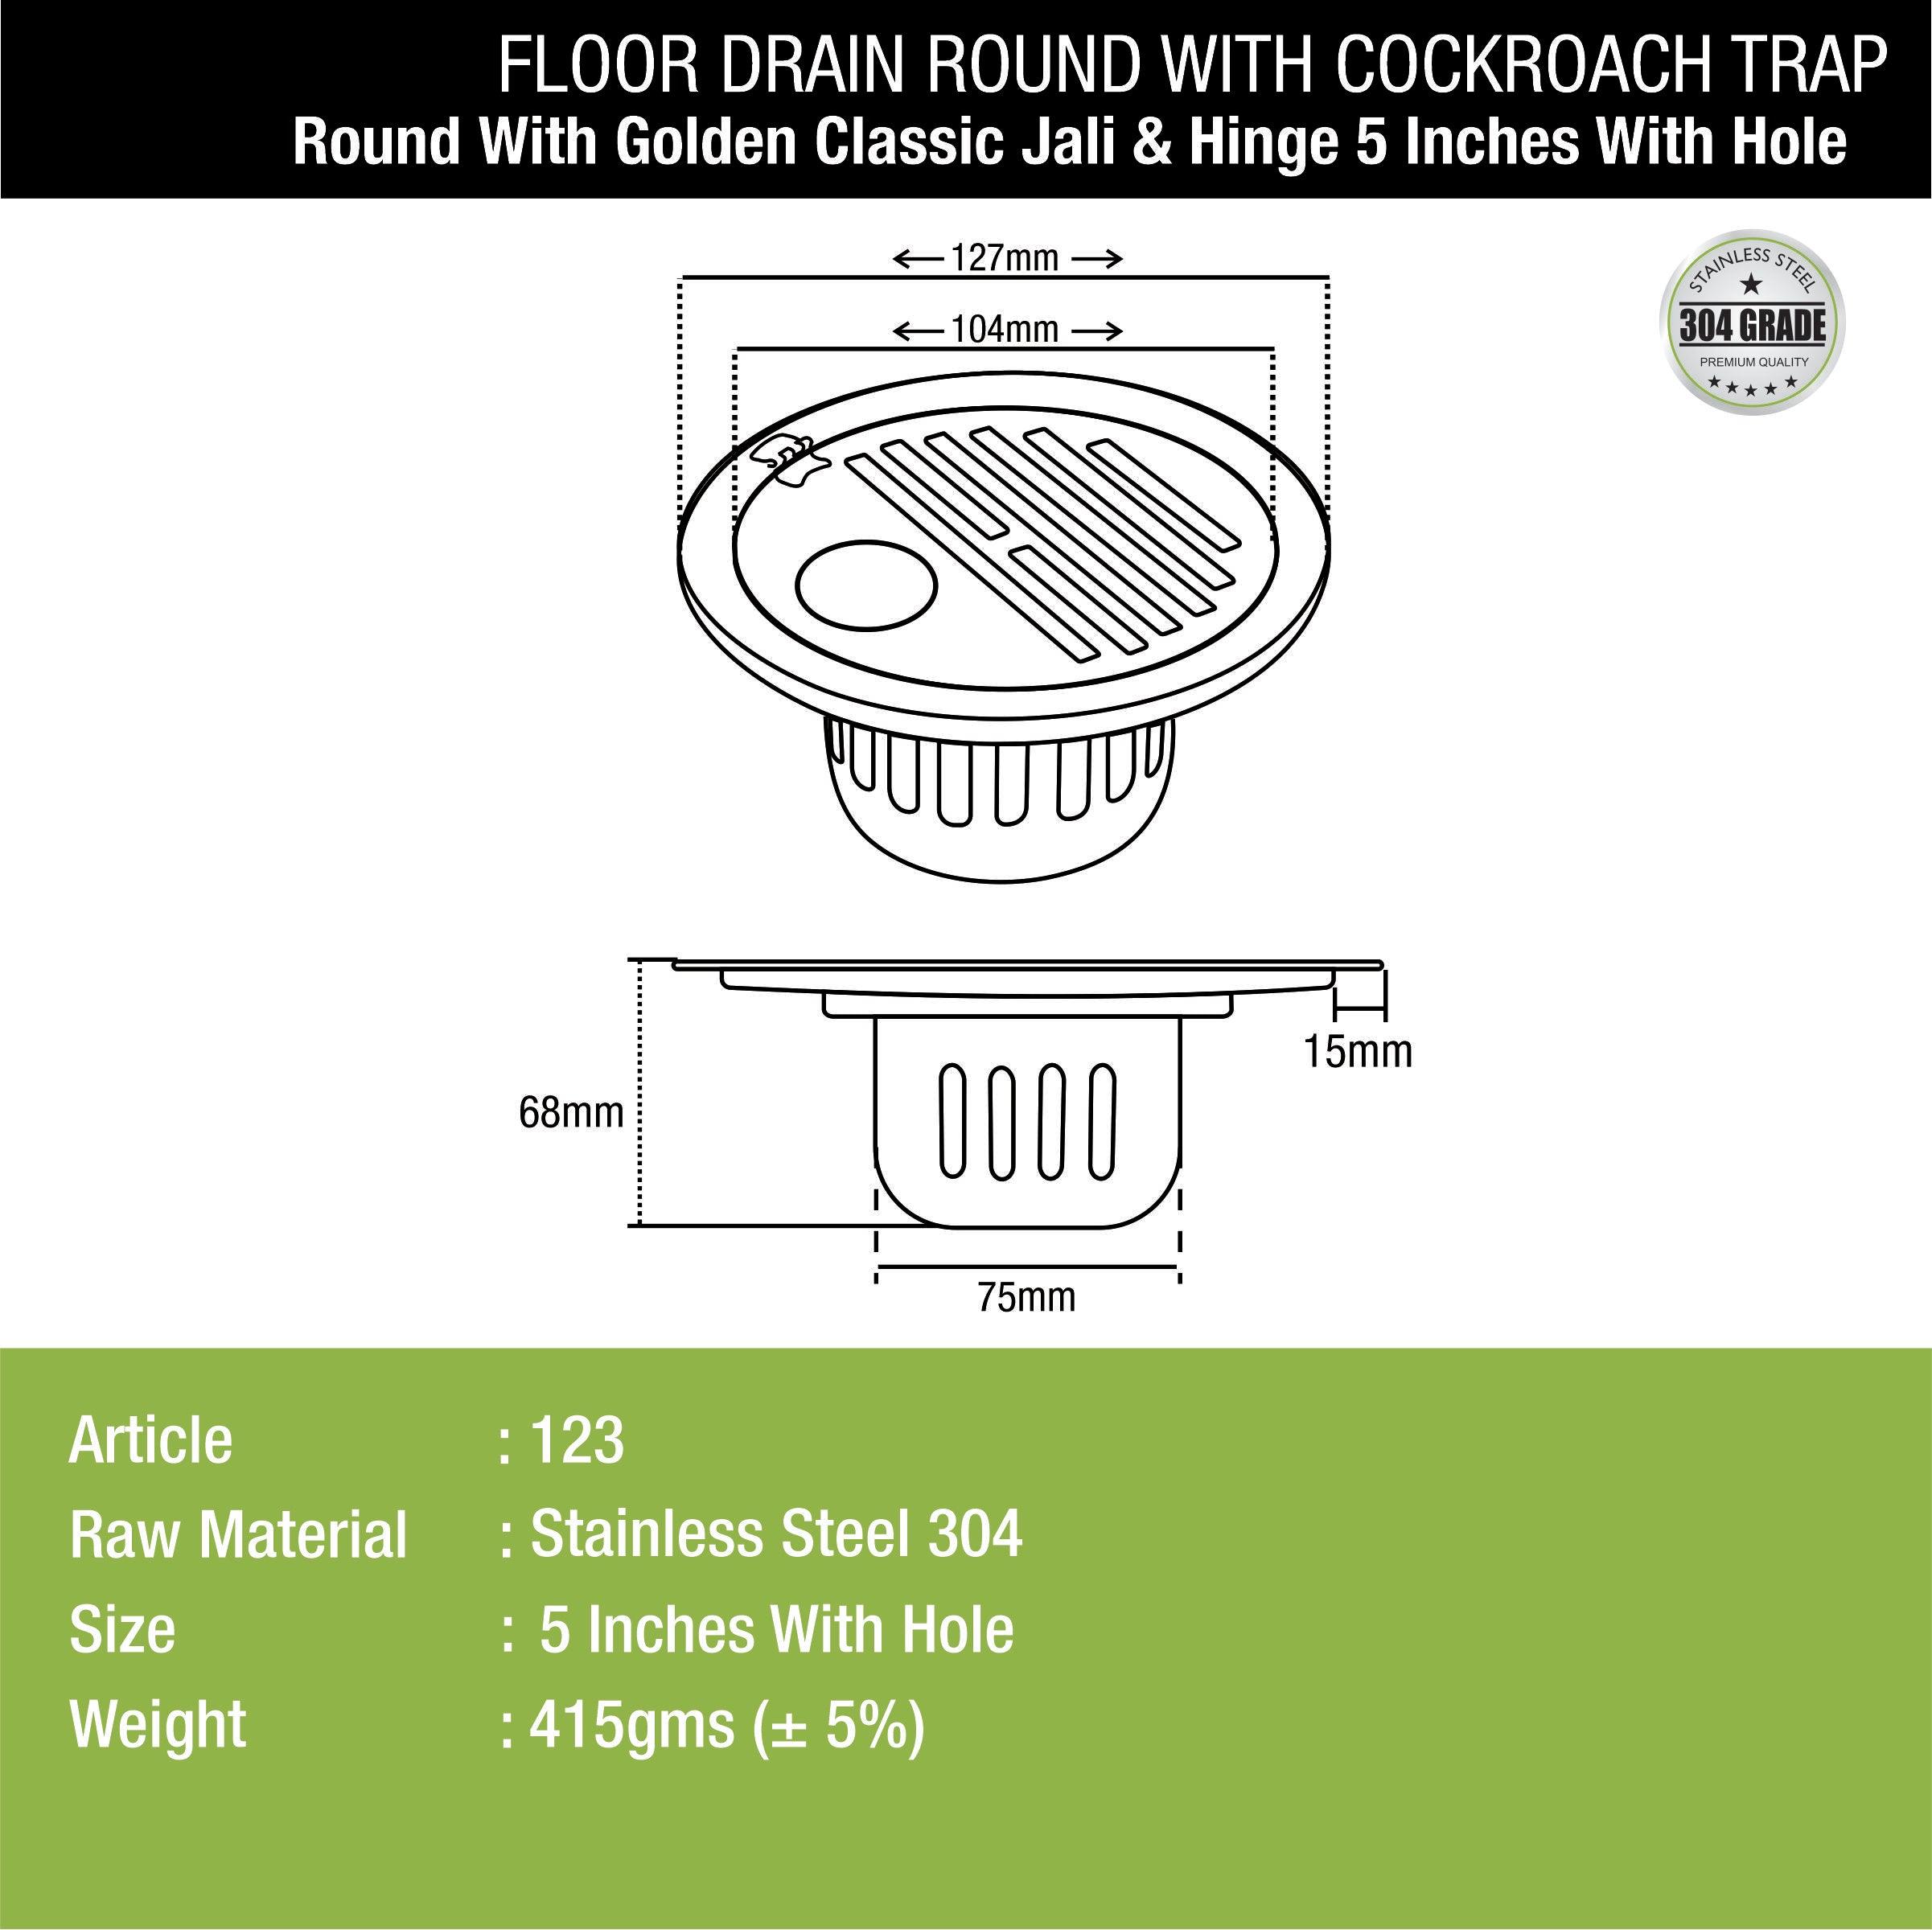 Golden Classic Jali Round Floor Drain (5 Inches) with Hinge, Hole and Cockroach Trap dimensions and sizes